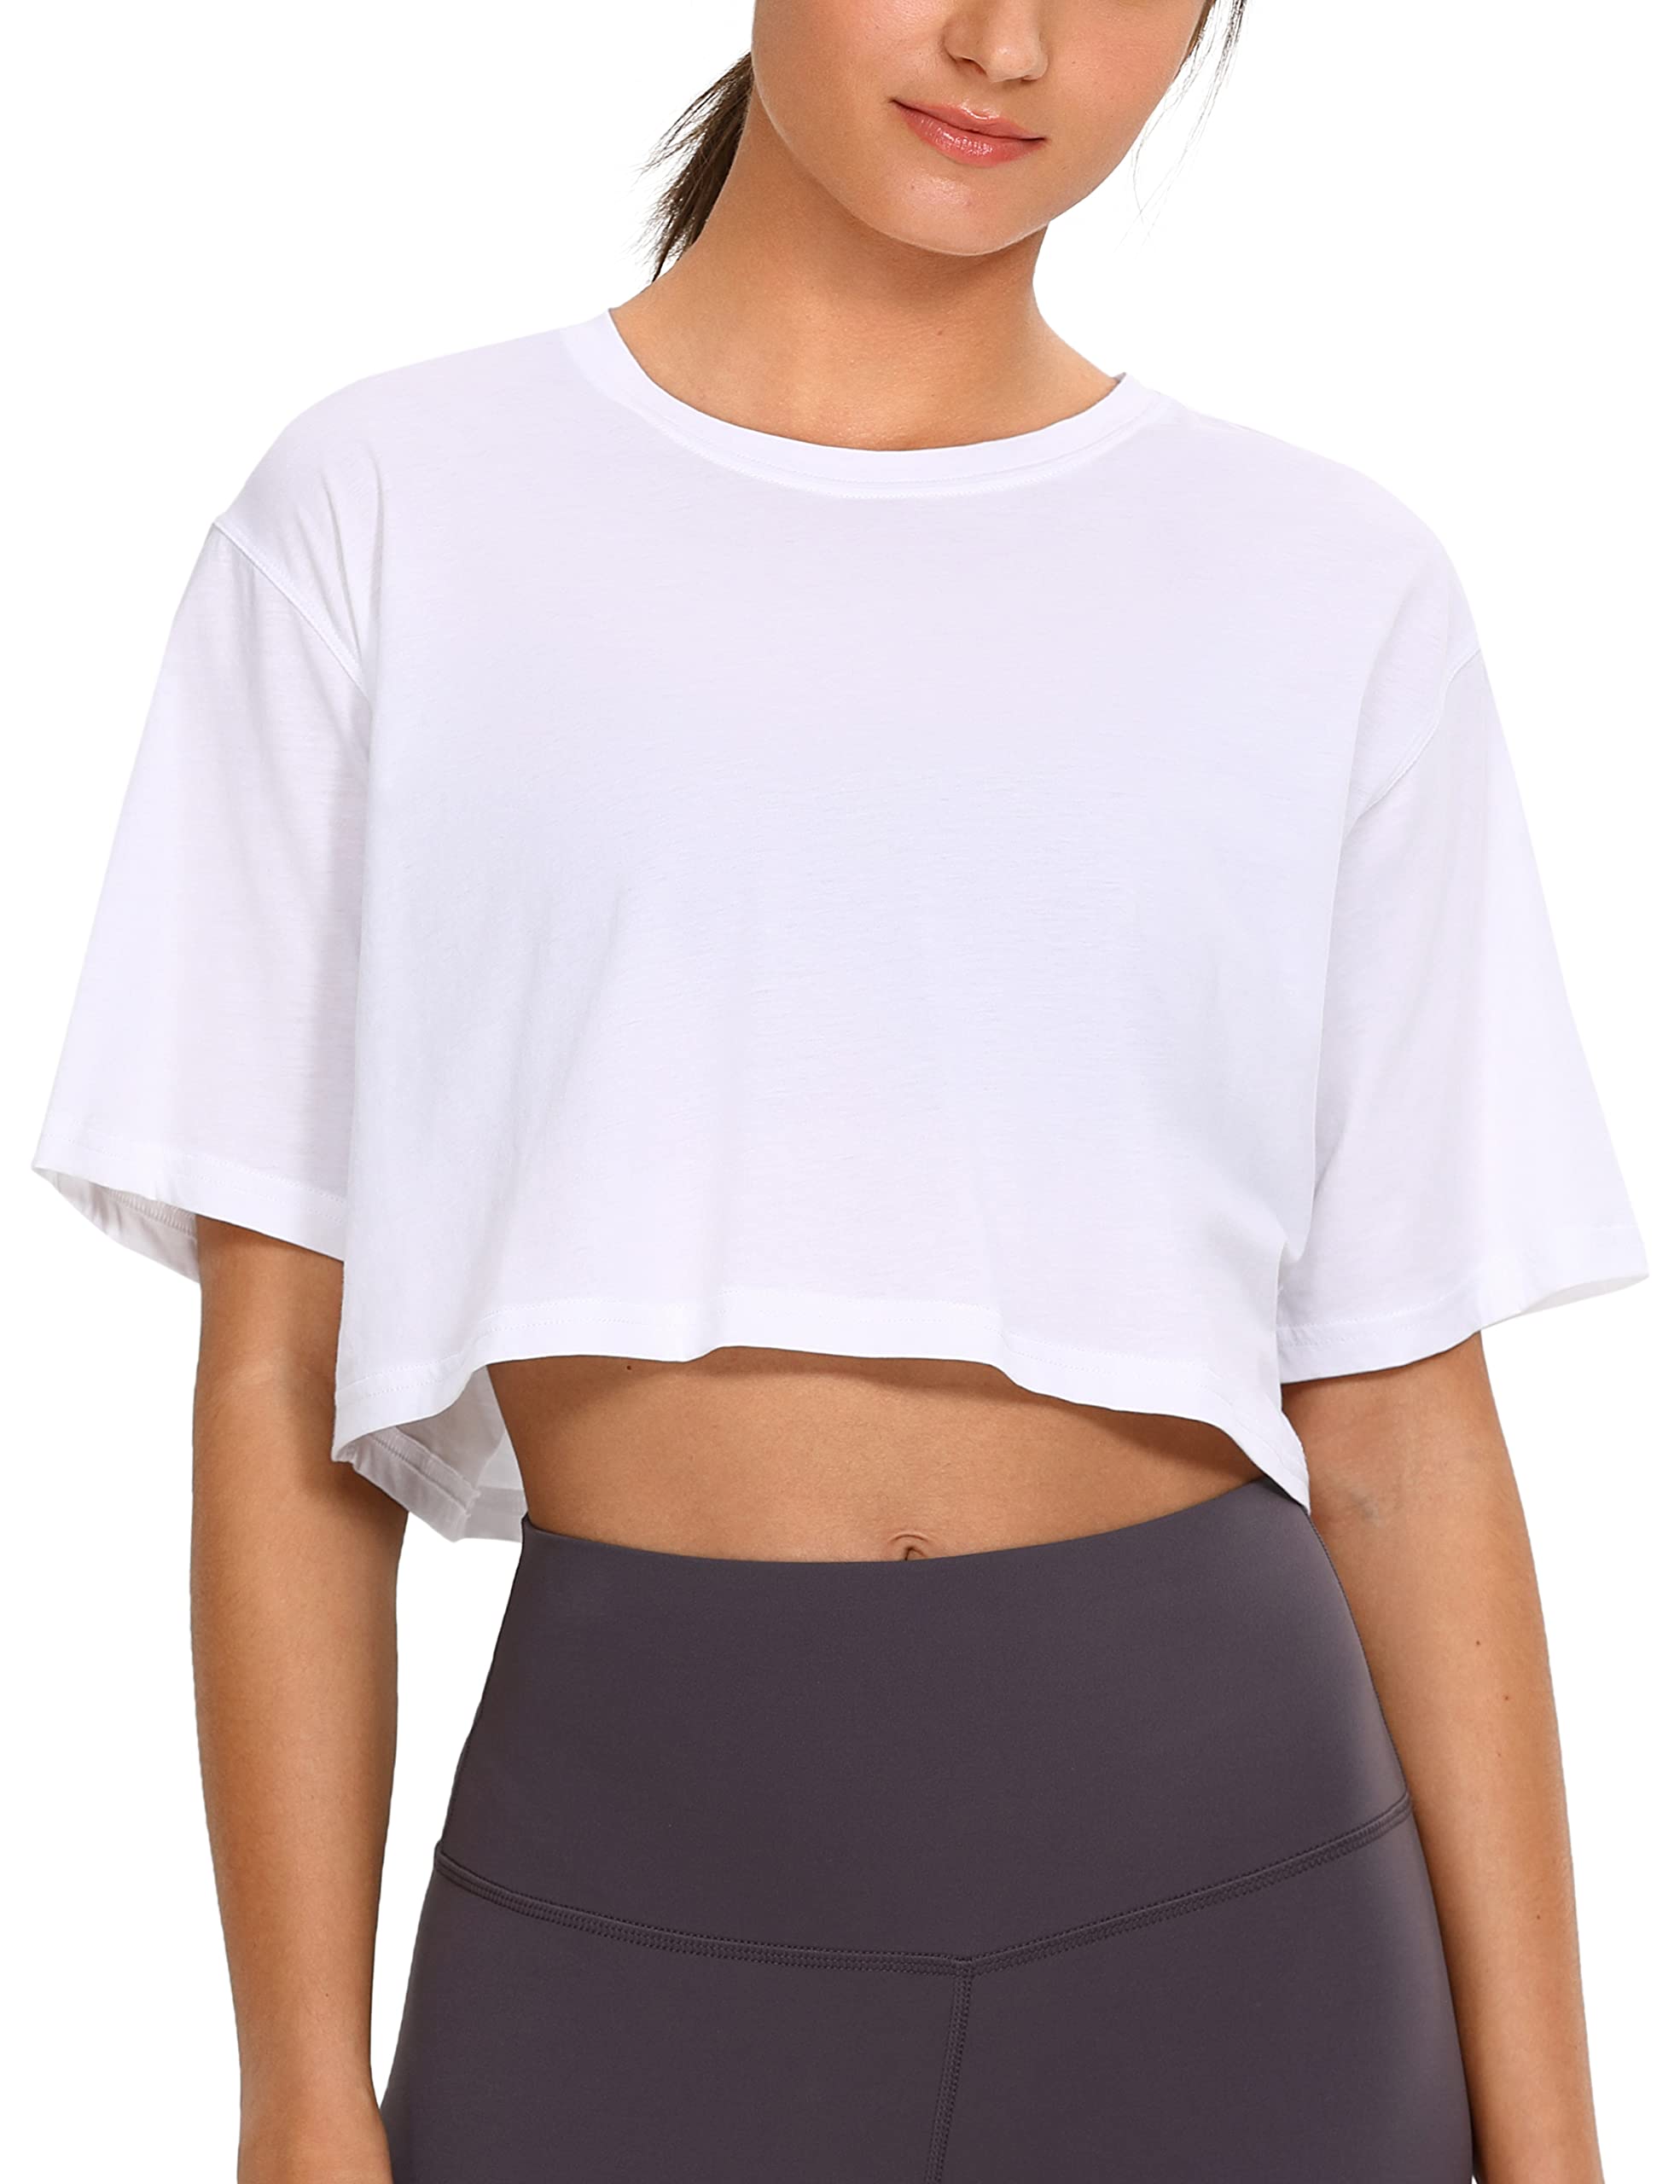 CRZ YOGA Women's Casual Loose Fit Pima Cotton Short Sleeves Cropped